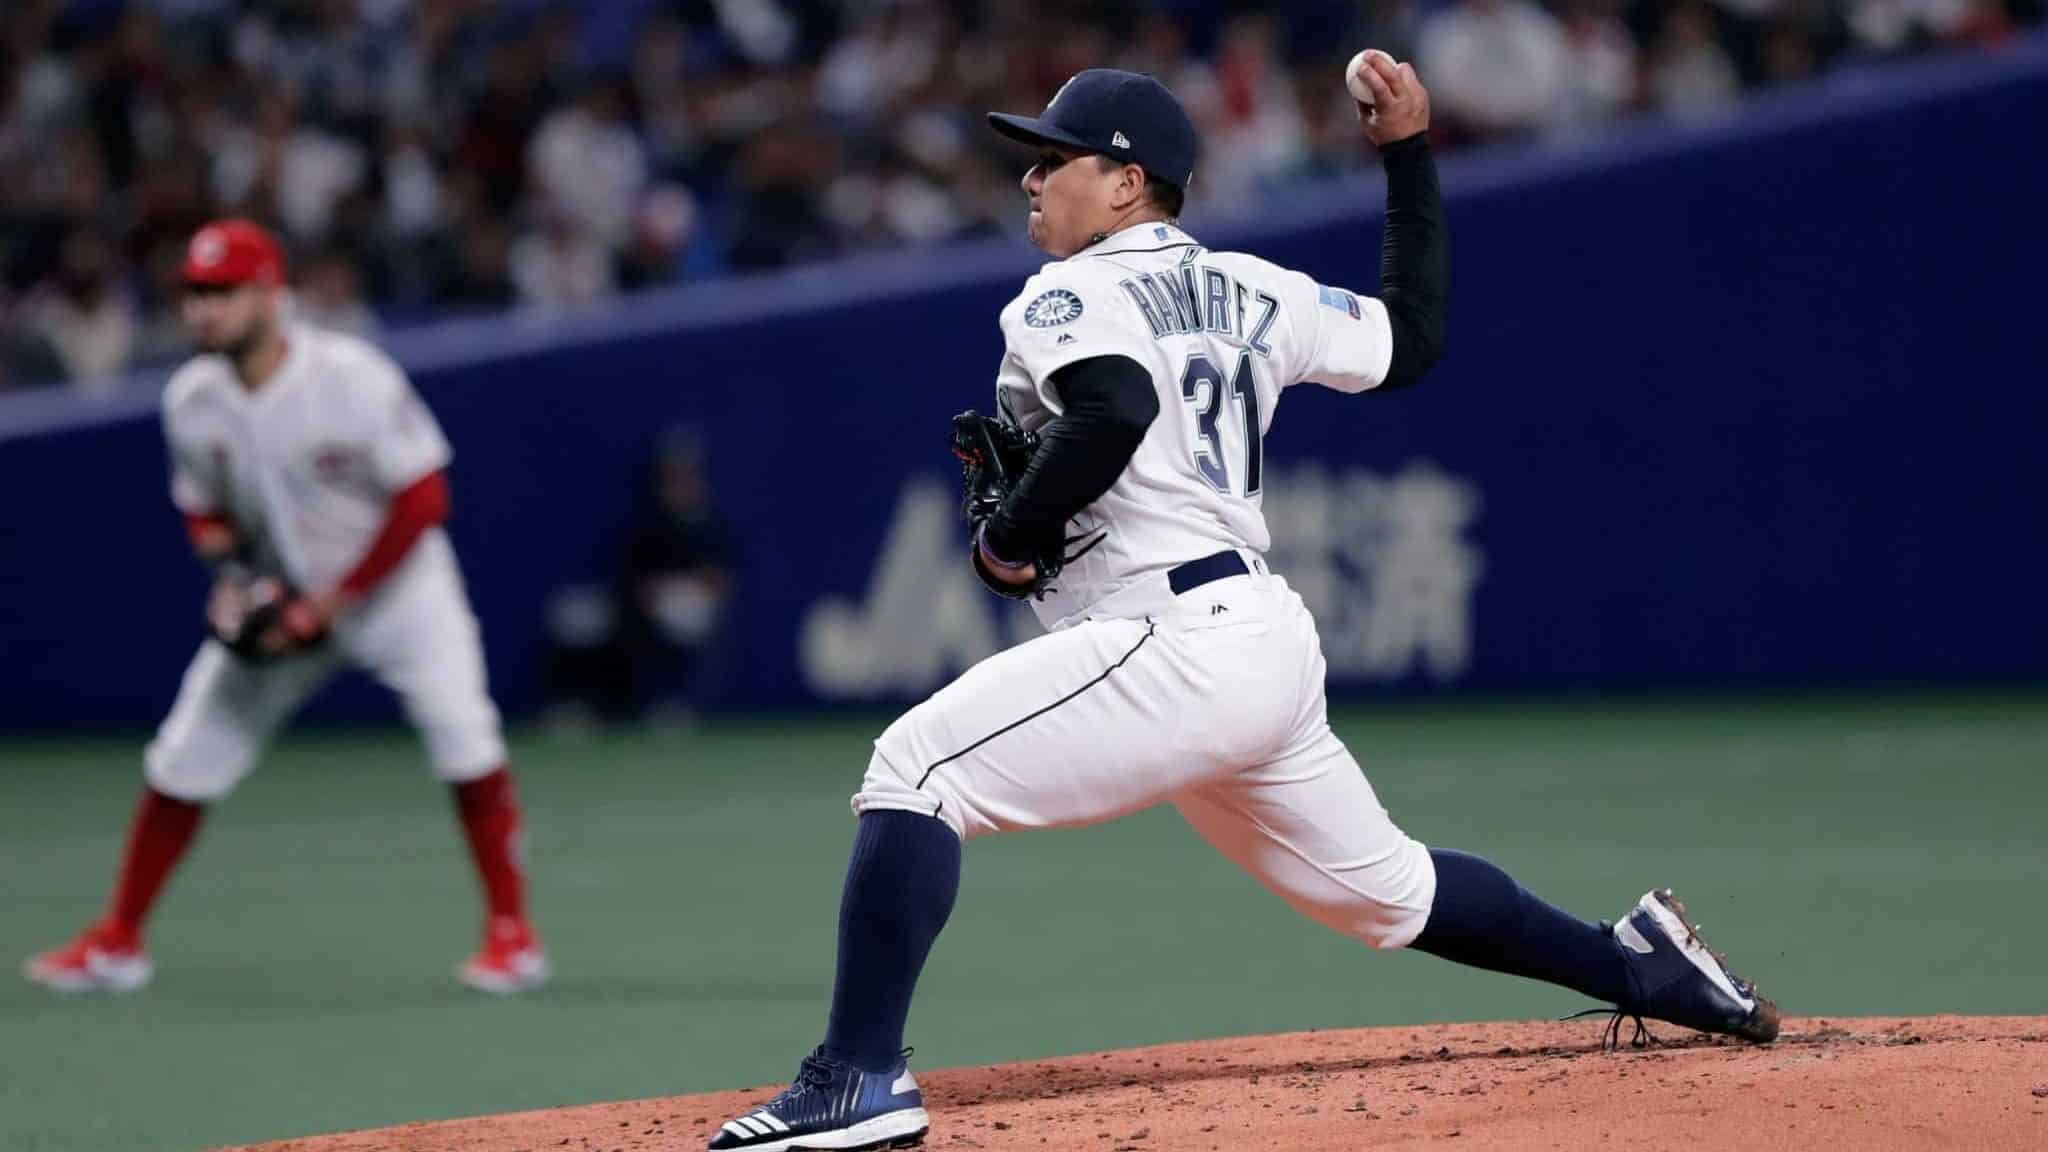 NAGOYA, JAPAN - NOVEMBER 15: Pitcher Erasmo Ramirez #31 of the Seattle Mariners throws in the top of 2nd inning during the game six between Japan and MLB All Stars at Nagoya Dome on November 15, 2018 in Nagoya, Aichi, Japan.